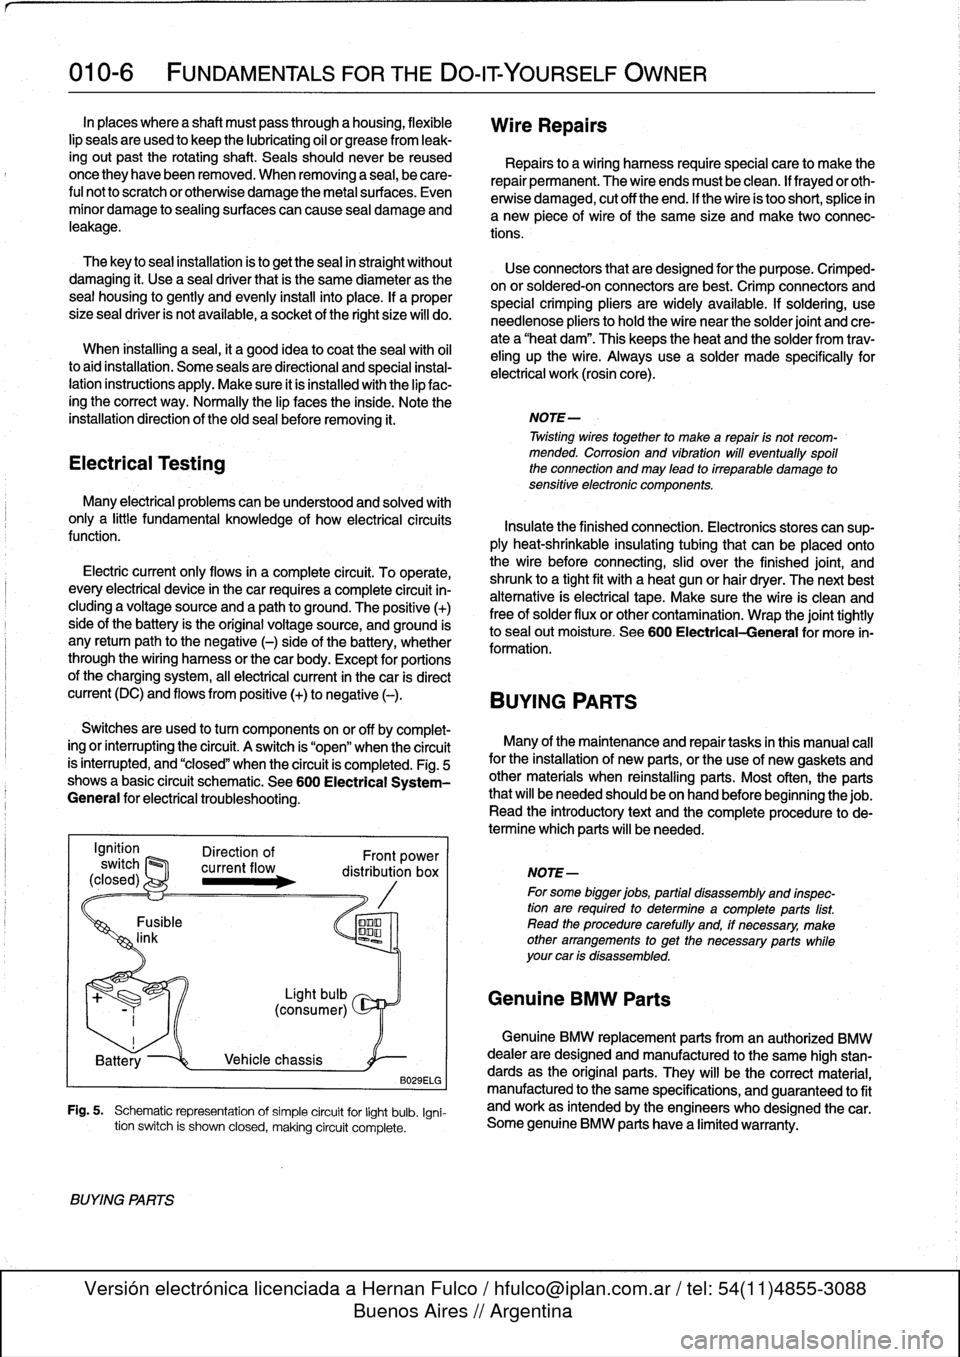 BMW 323i 1992 E36 Workshop Manual 
010-
6

	

FUNDAMENTALS
FOR
THE
DO-ITYOURSELF
OWNER

In
places
where
a
shaft
mustpass
through
a
housing,
flexible
lip
seals
areused
to
keep
the
lubricating
oil
or
grease
from
leak-

ingout
past
the
r